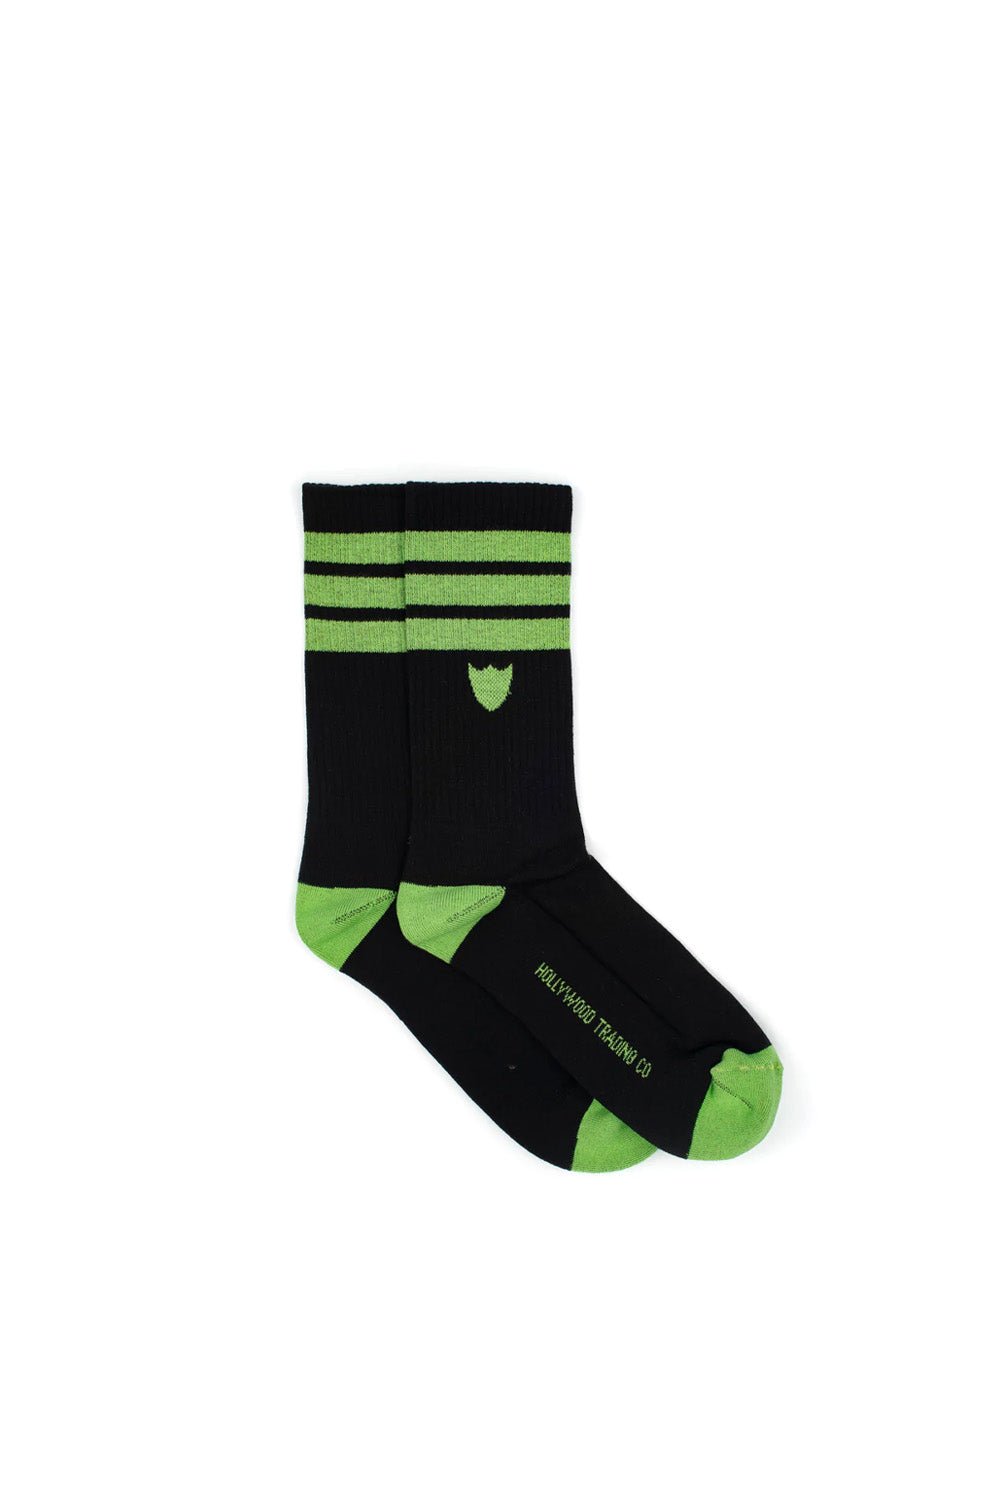 SHIELD STRIPES WOMAN SOCKS Signature woman socks with HTC shield logo. 85% Cotton 10% Polyamide 5% Elastane. Made in Italy HTC LOS ANGELES